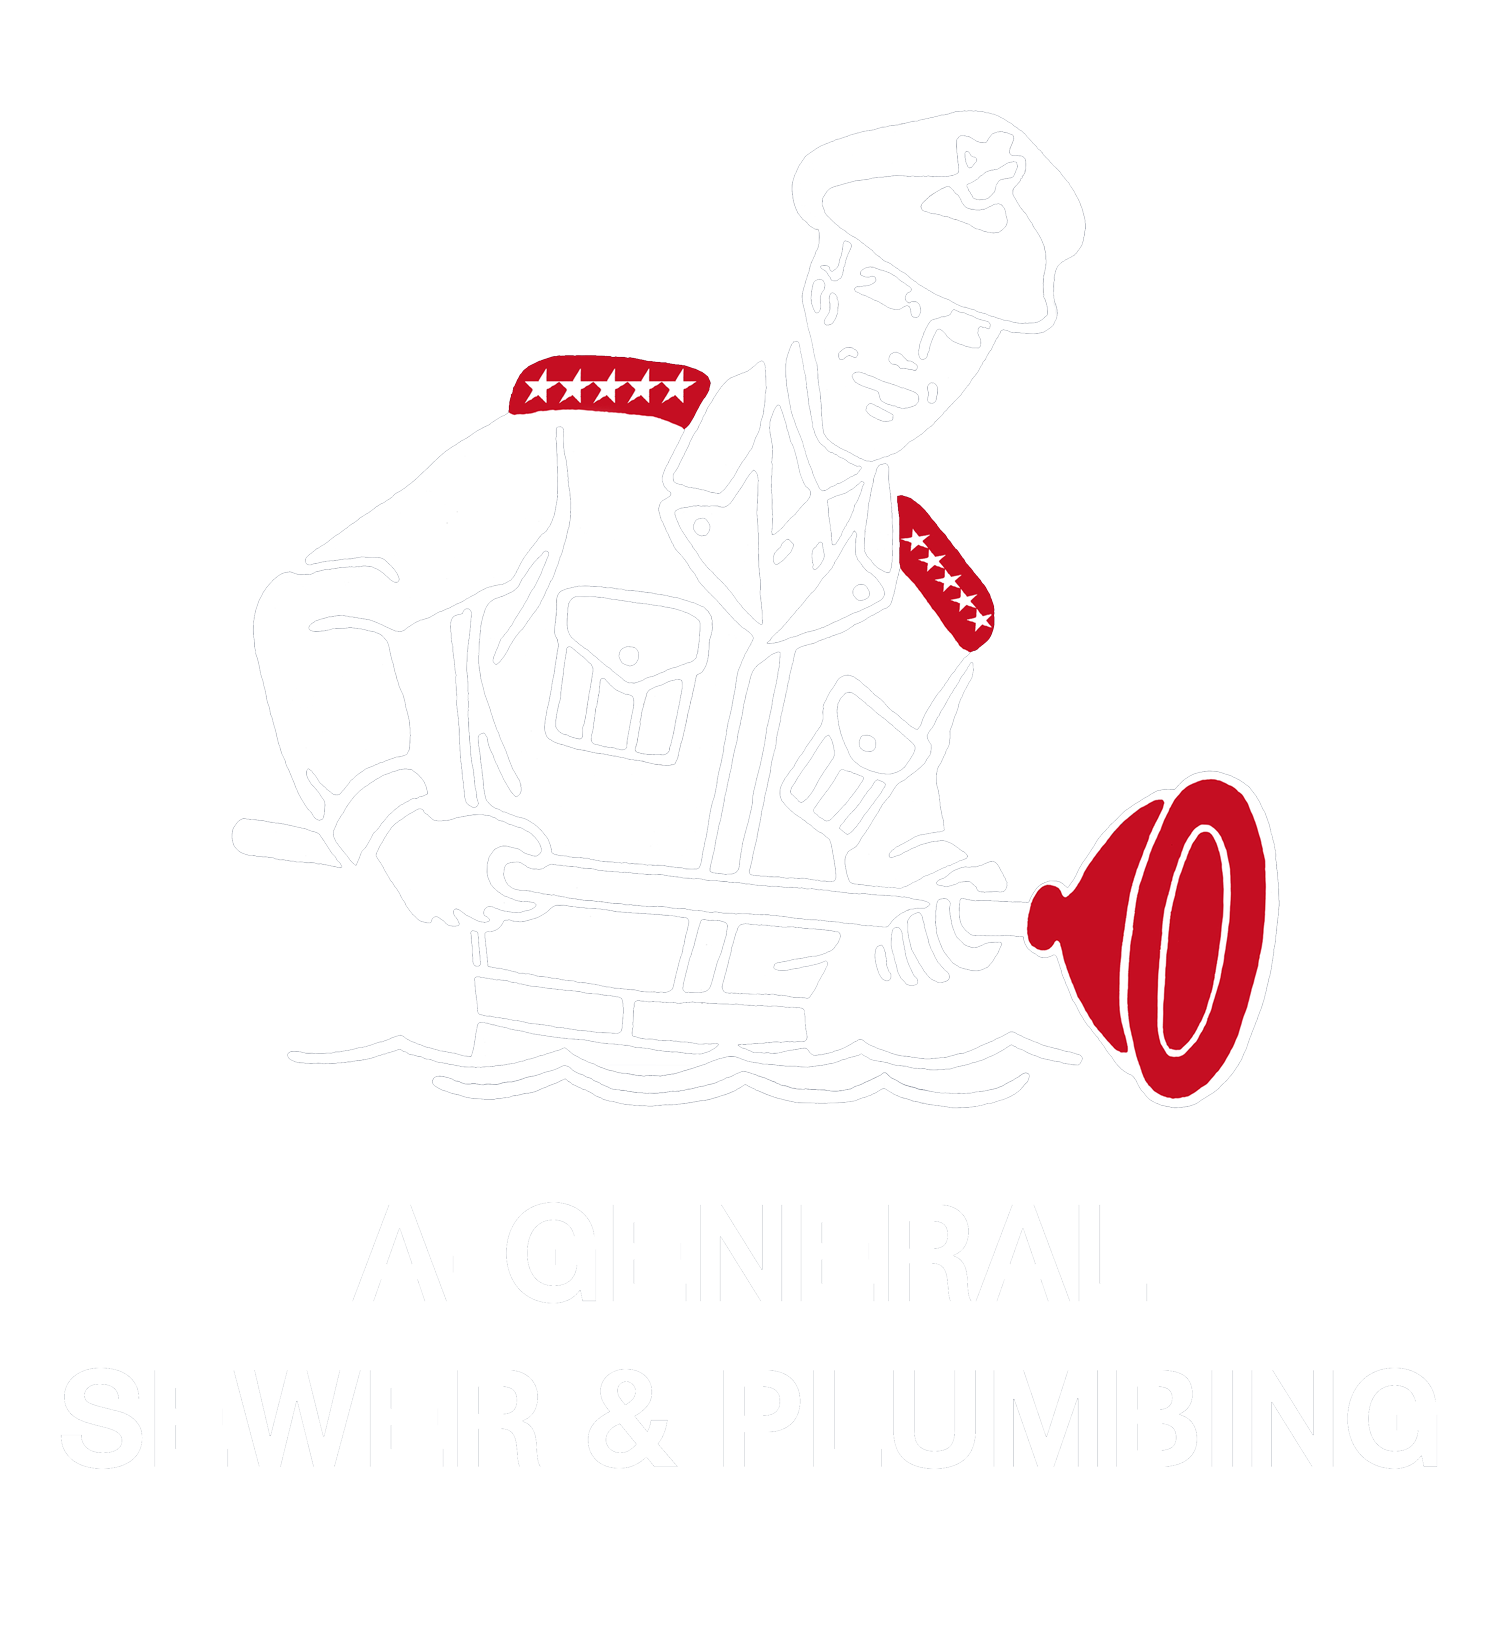 A-General Sewer and Plumbing Service - Logo